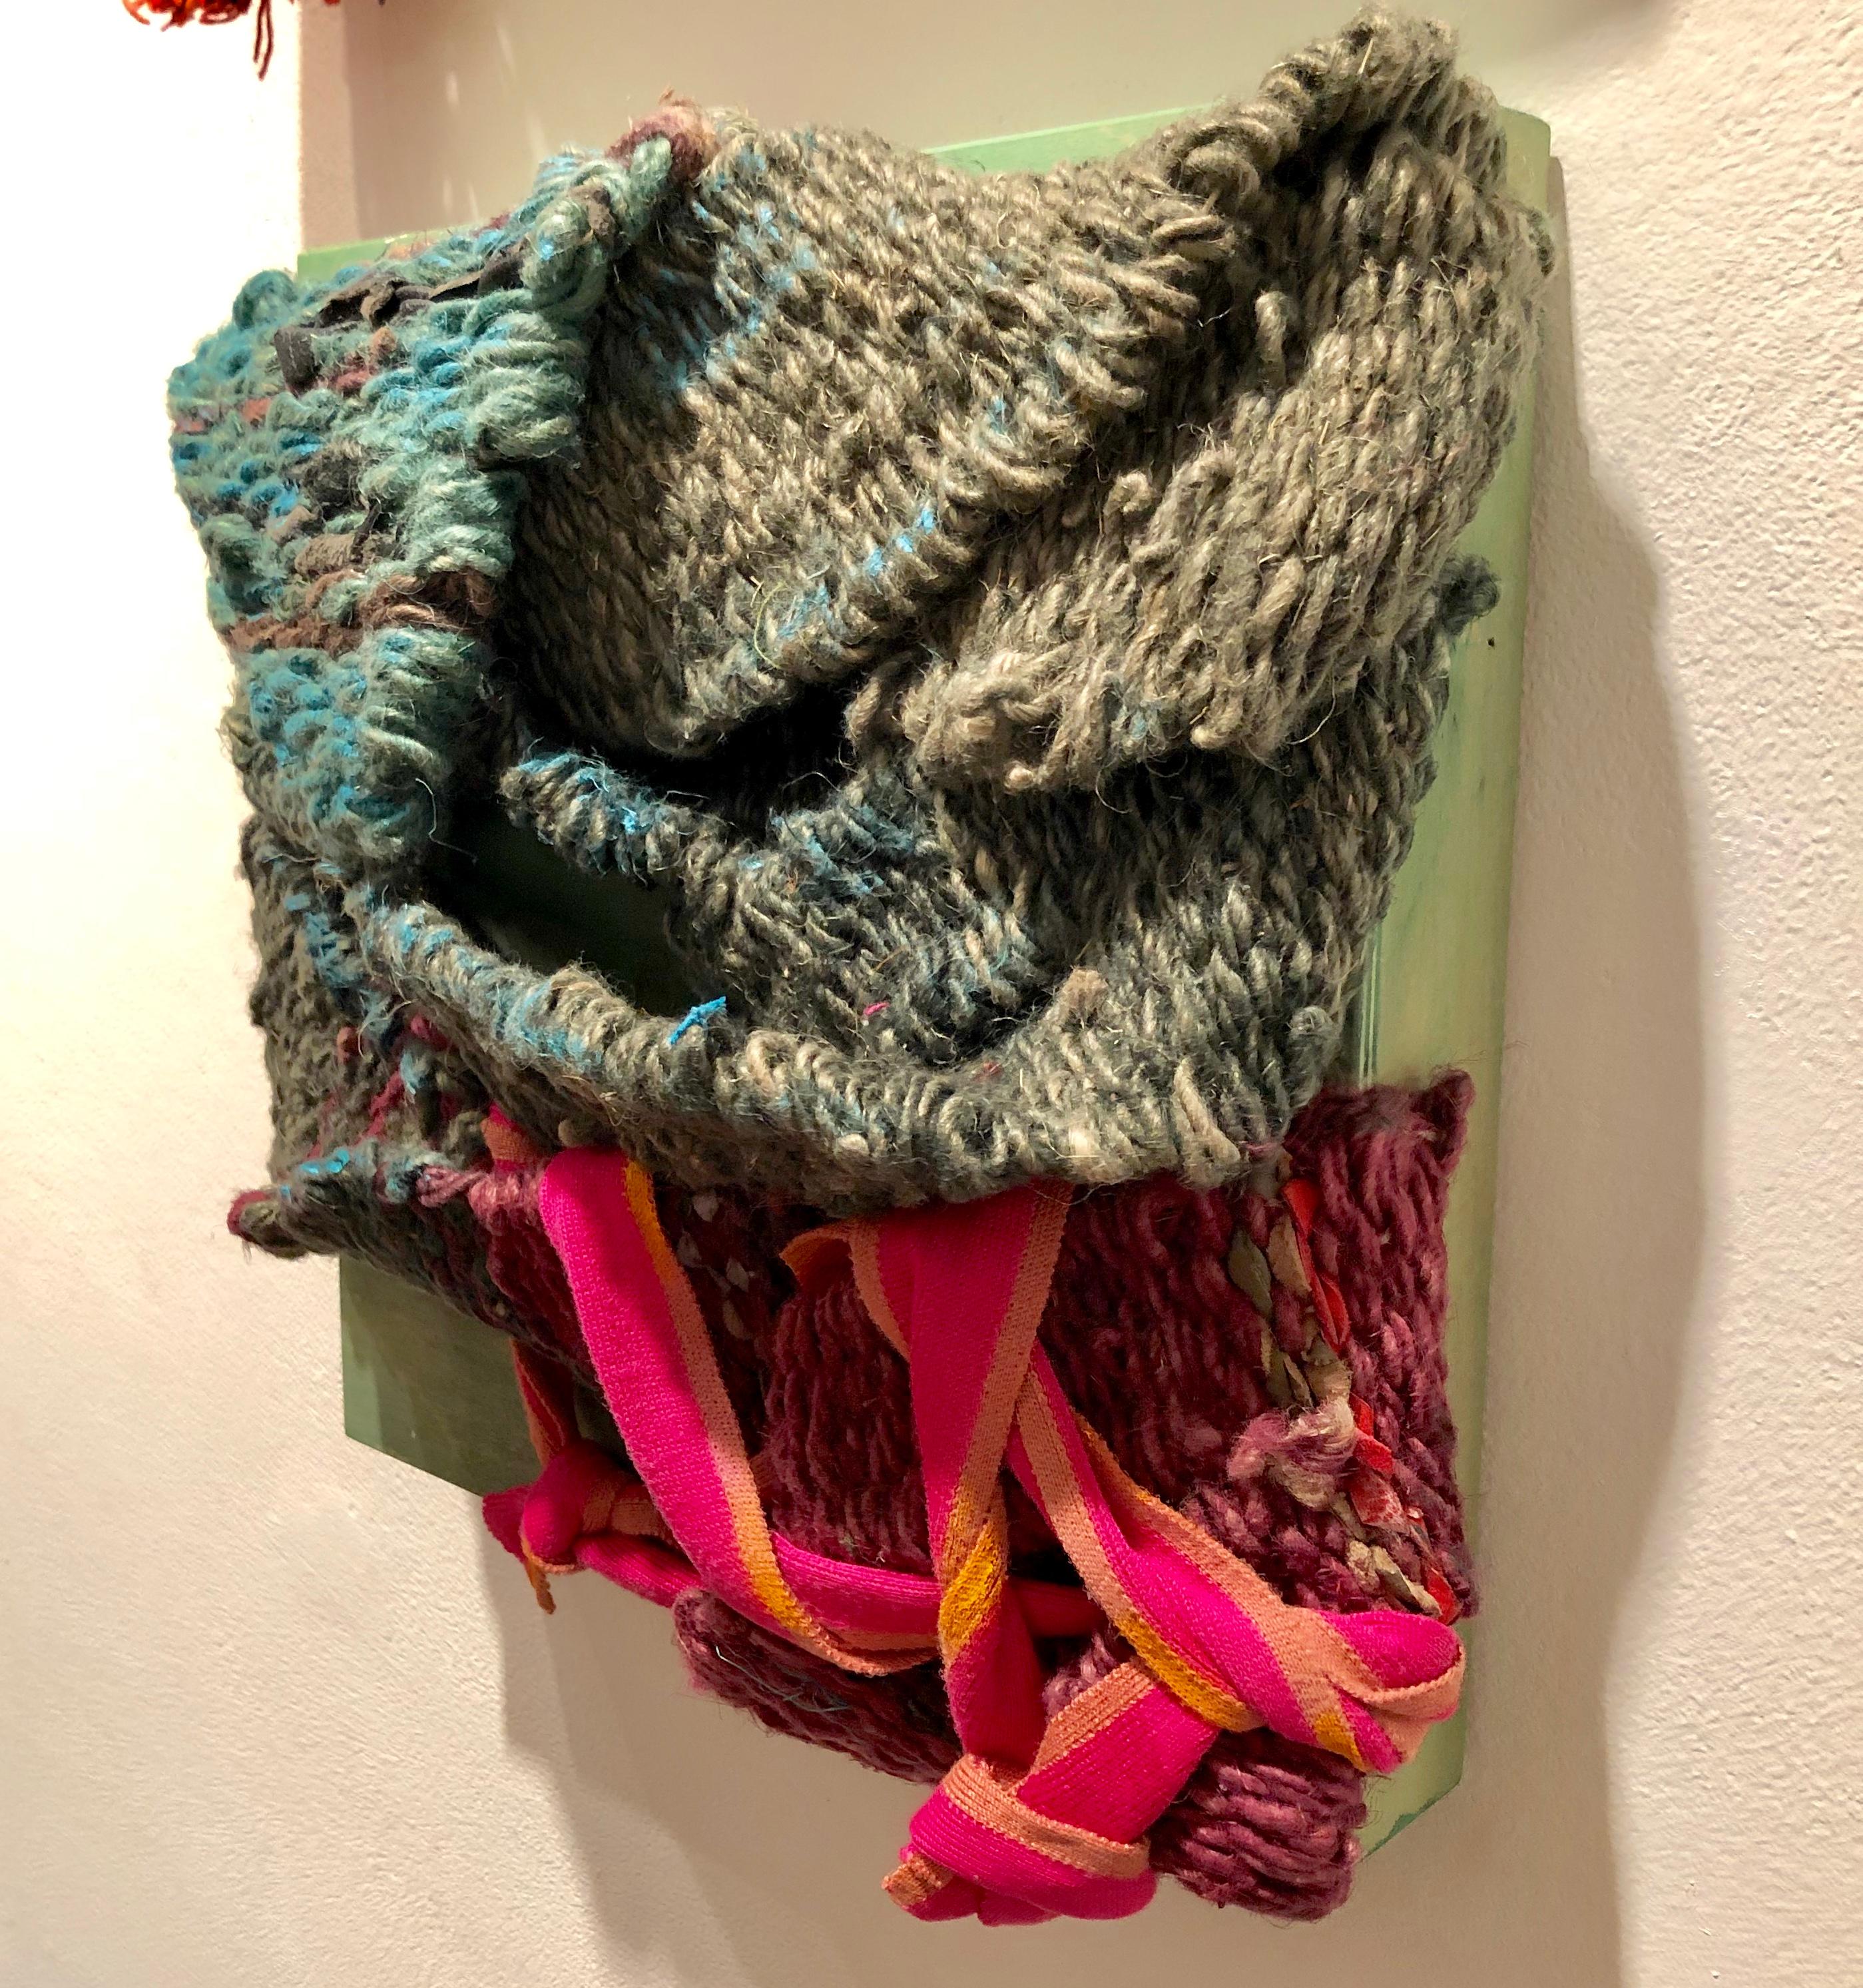 Genten/Color - Fabric and mixed media sculpture, bold colors, varying textures - Assemblage Mixed Media Art by Diane Cooper